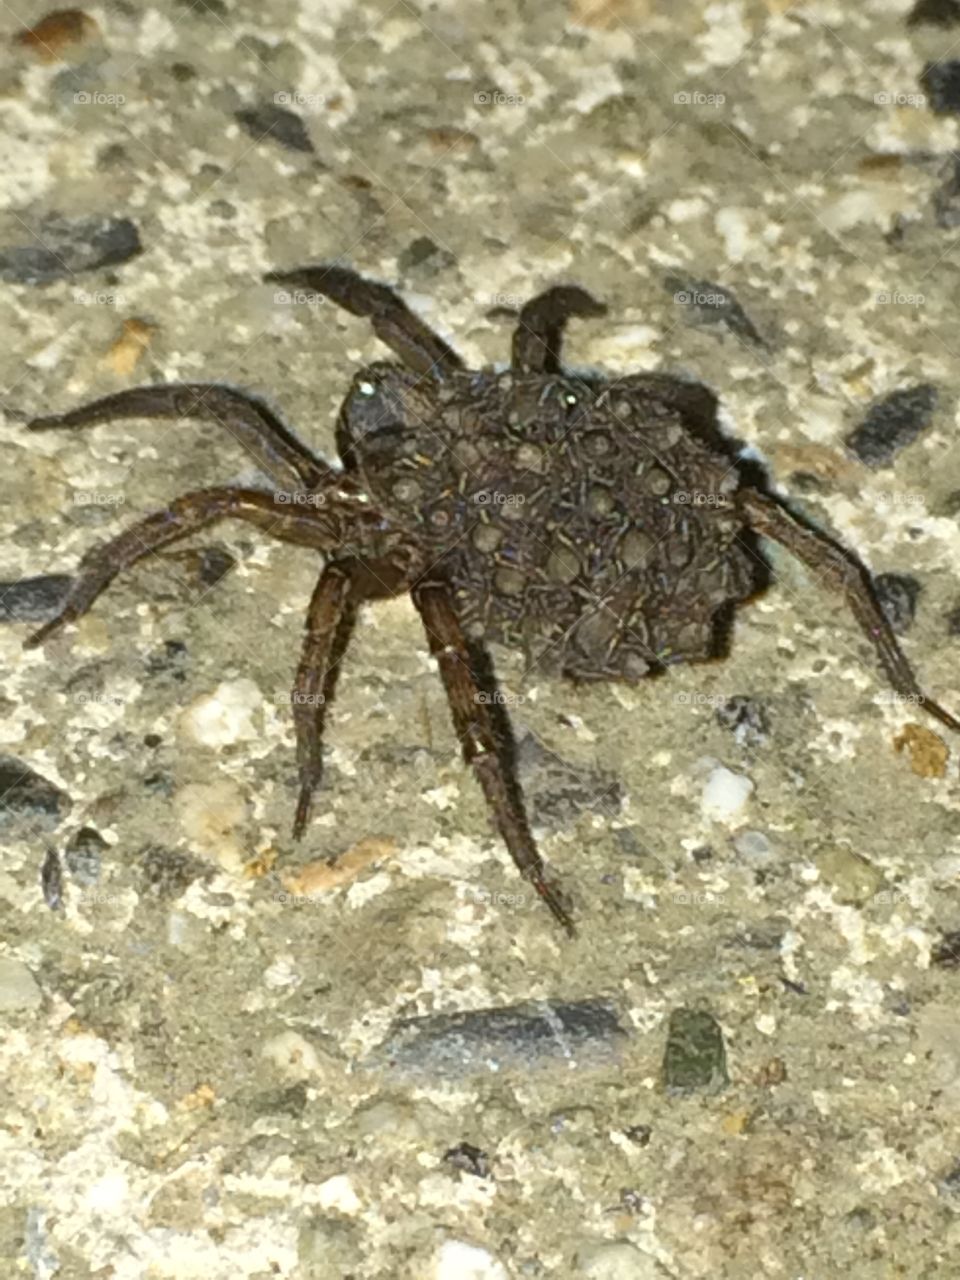 Wolf spider carrying her babies